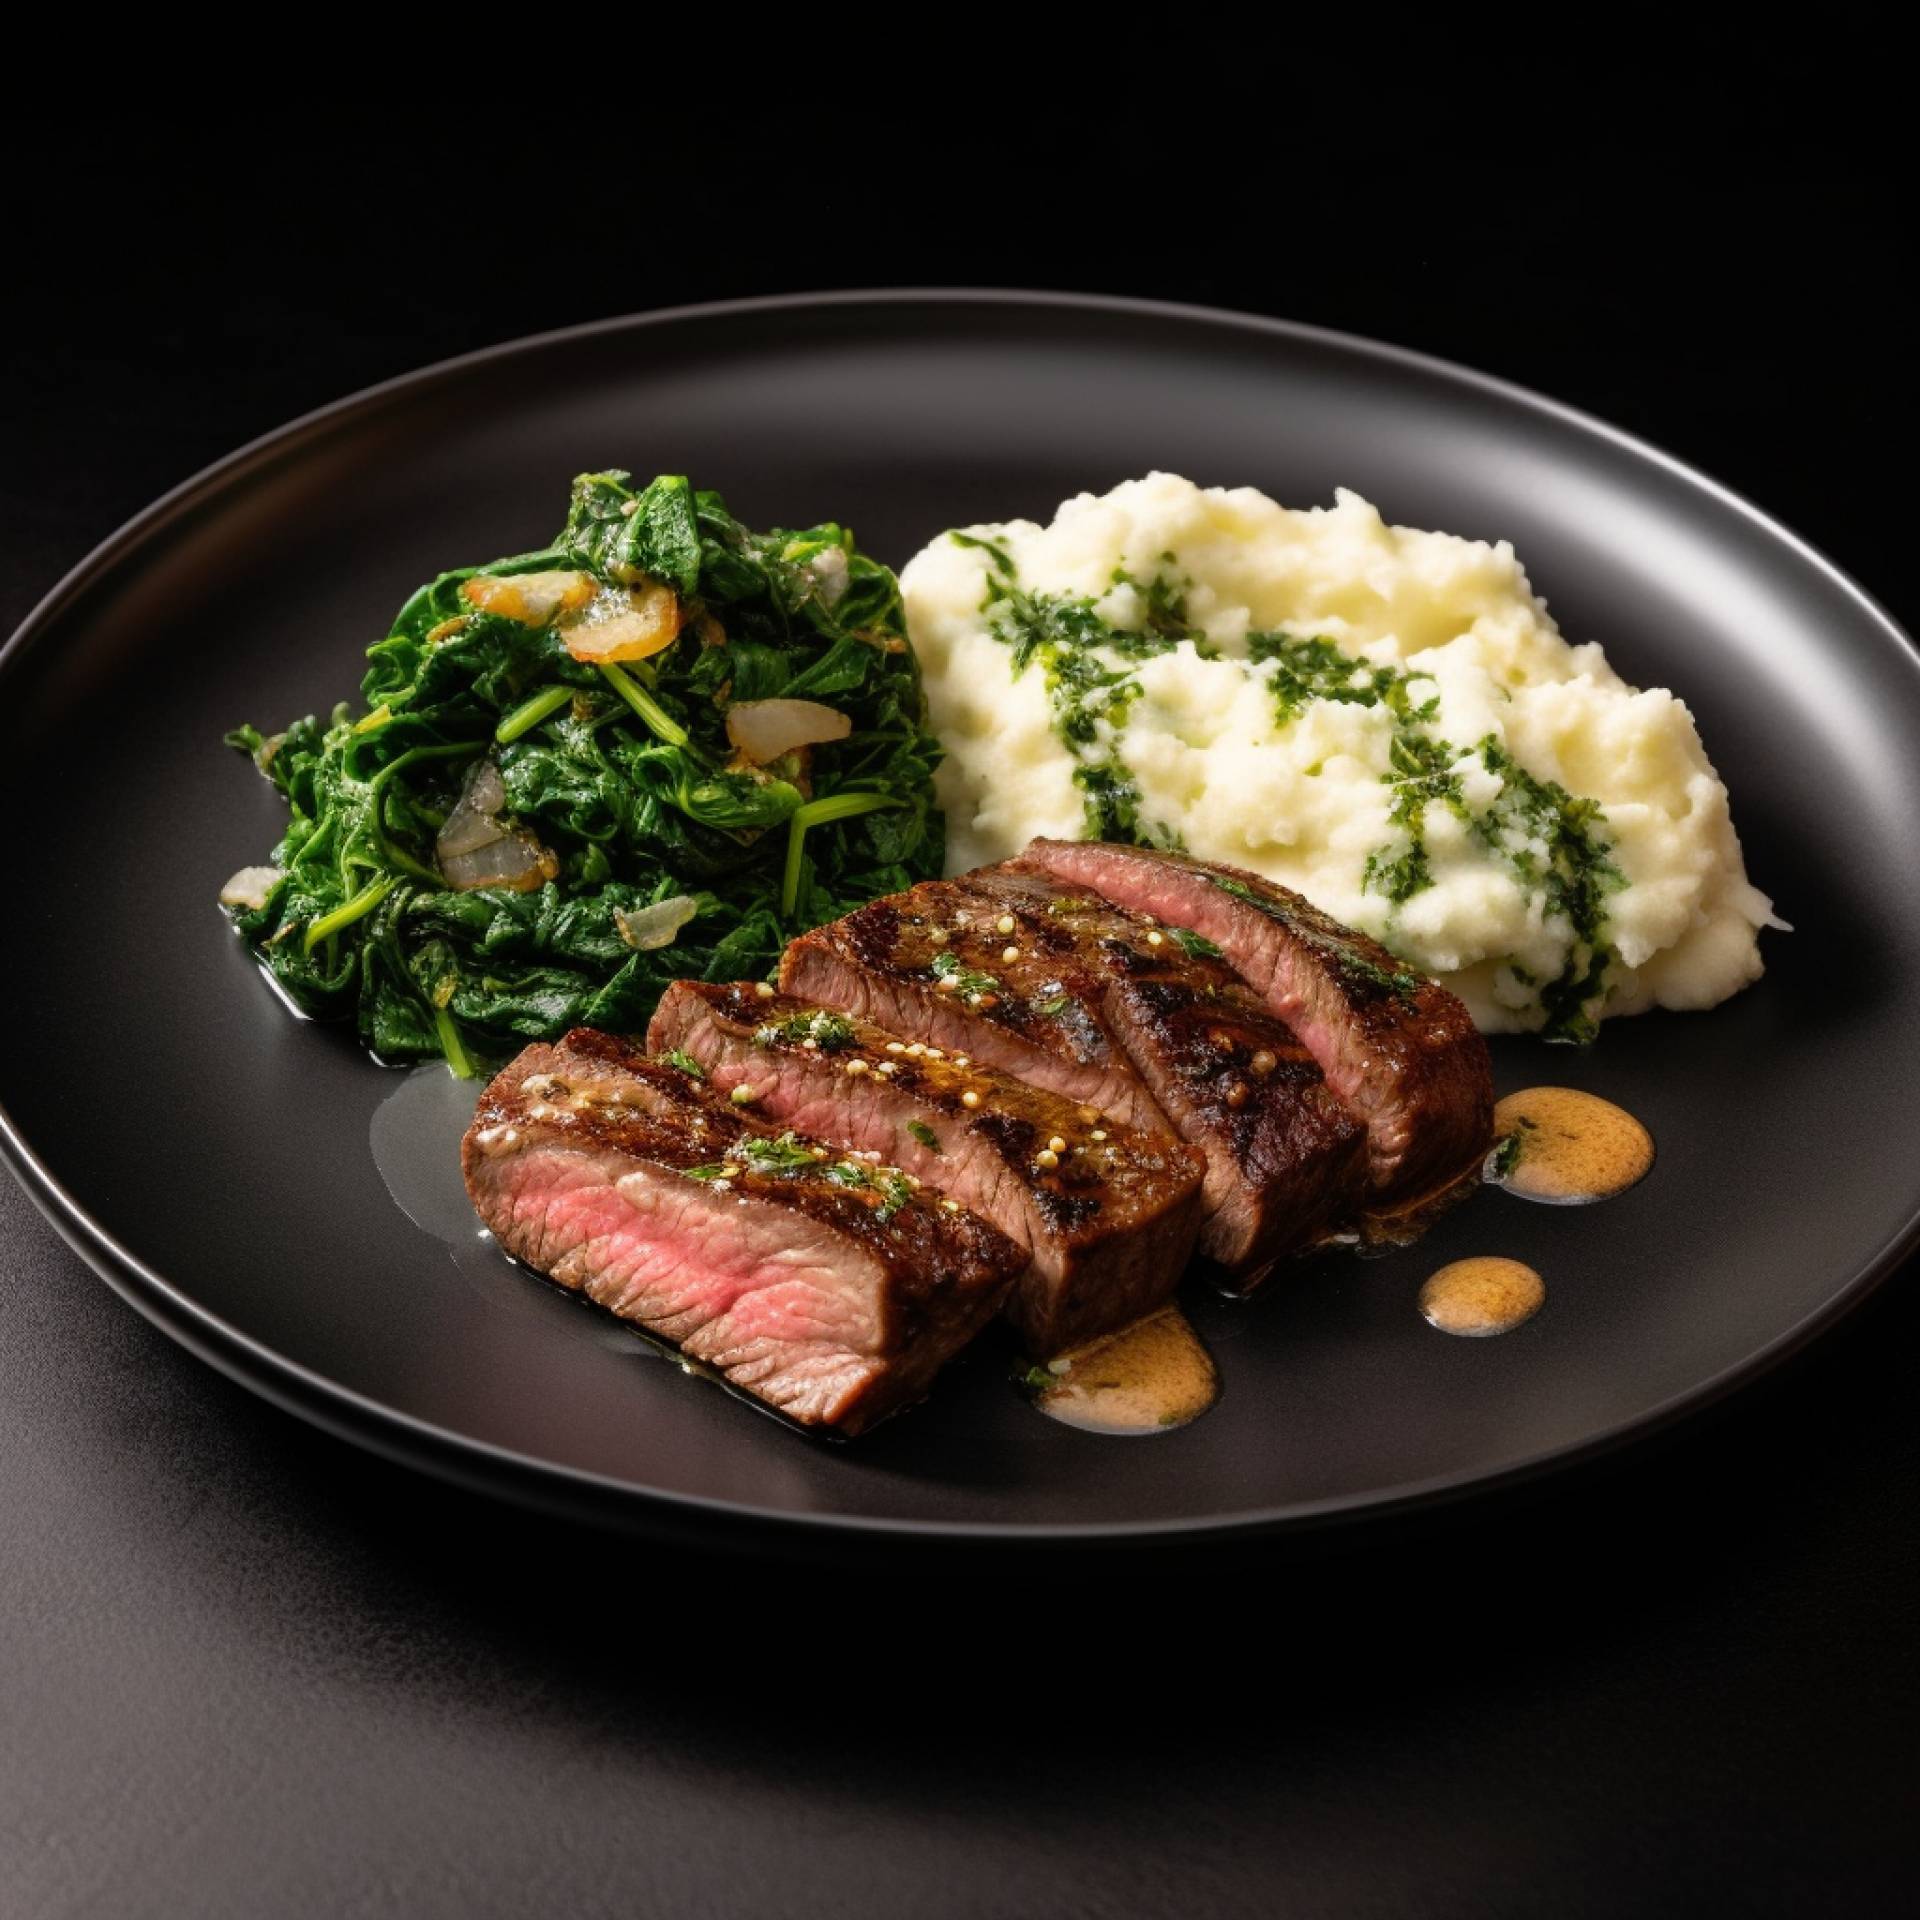 Grilled Chimichurri Grass Fed Steak with Bliss Mashed Potatoes: